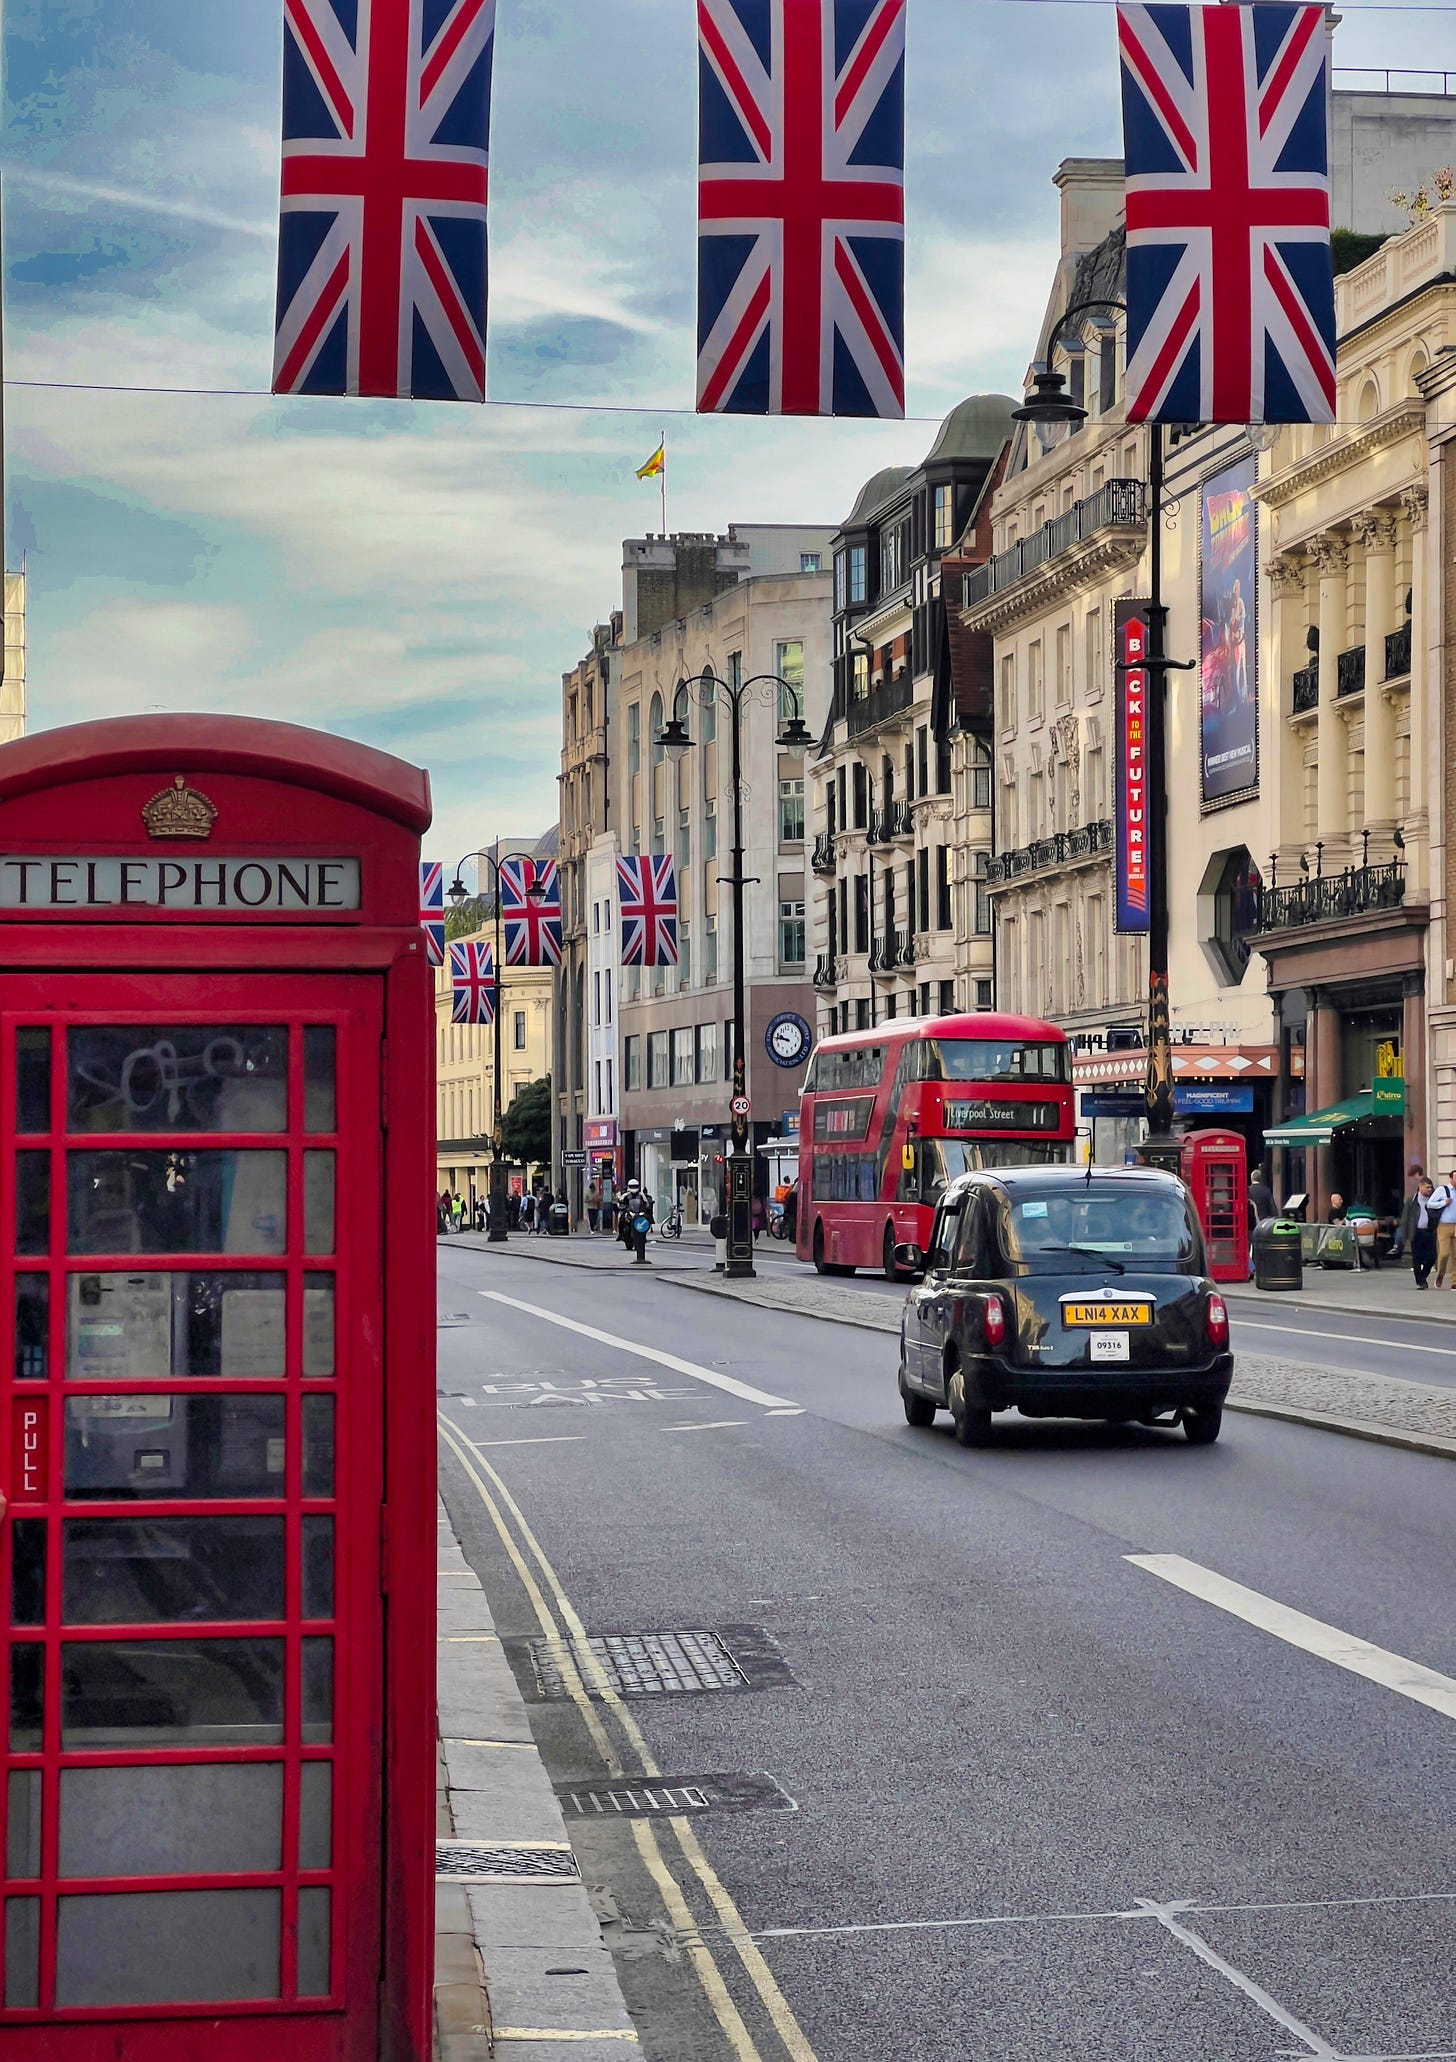 London street scene with red telephone box in the forefront left, double decker bus on the right, buildings and union flags hung across the street